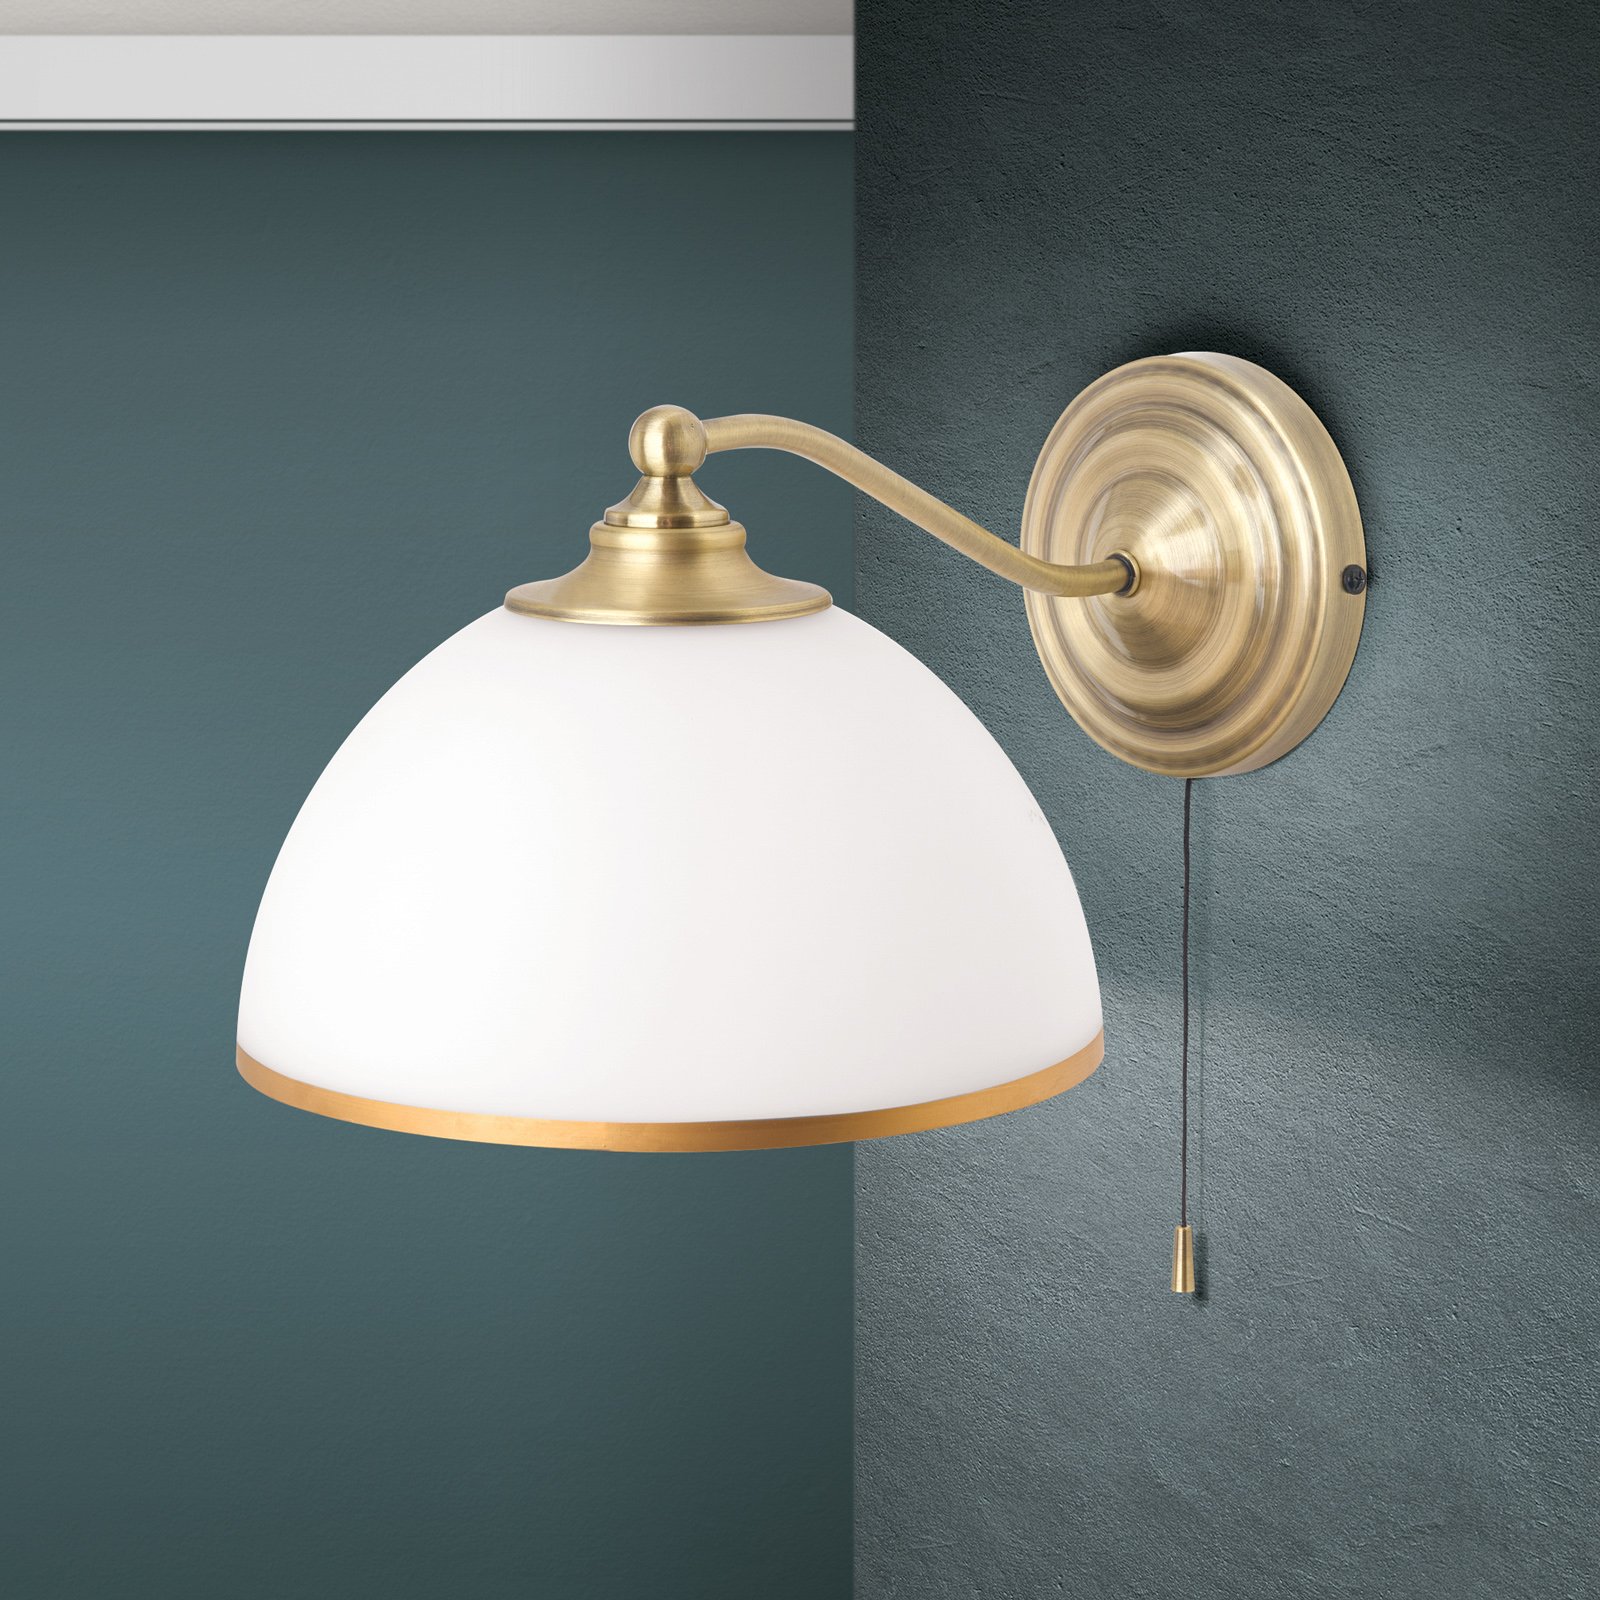 Old Lamp wall light with a pull switch